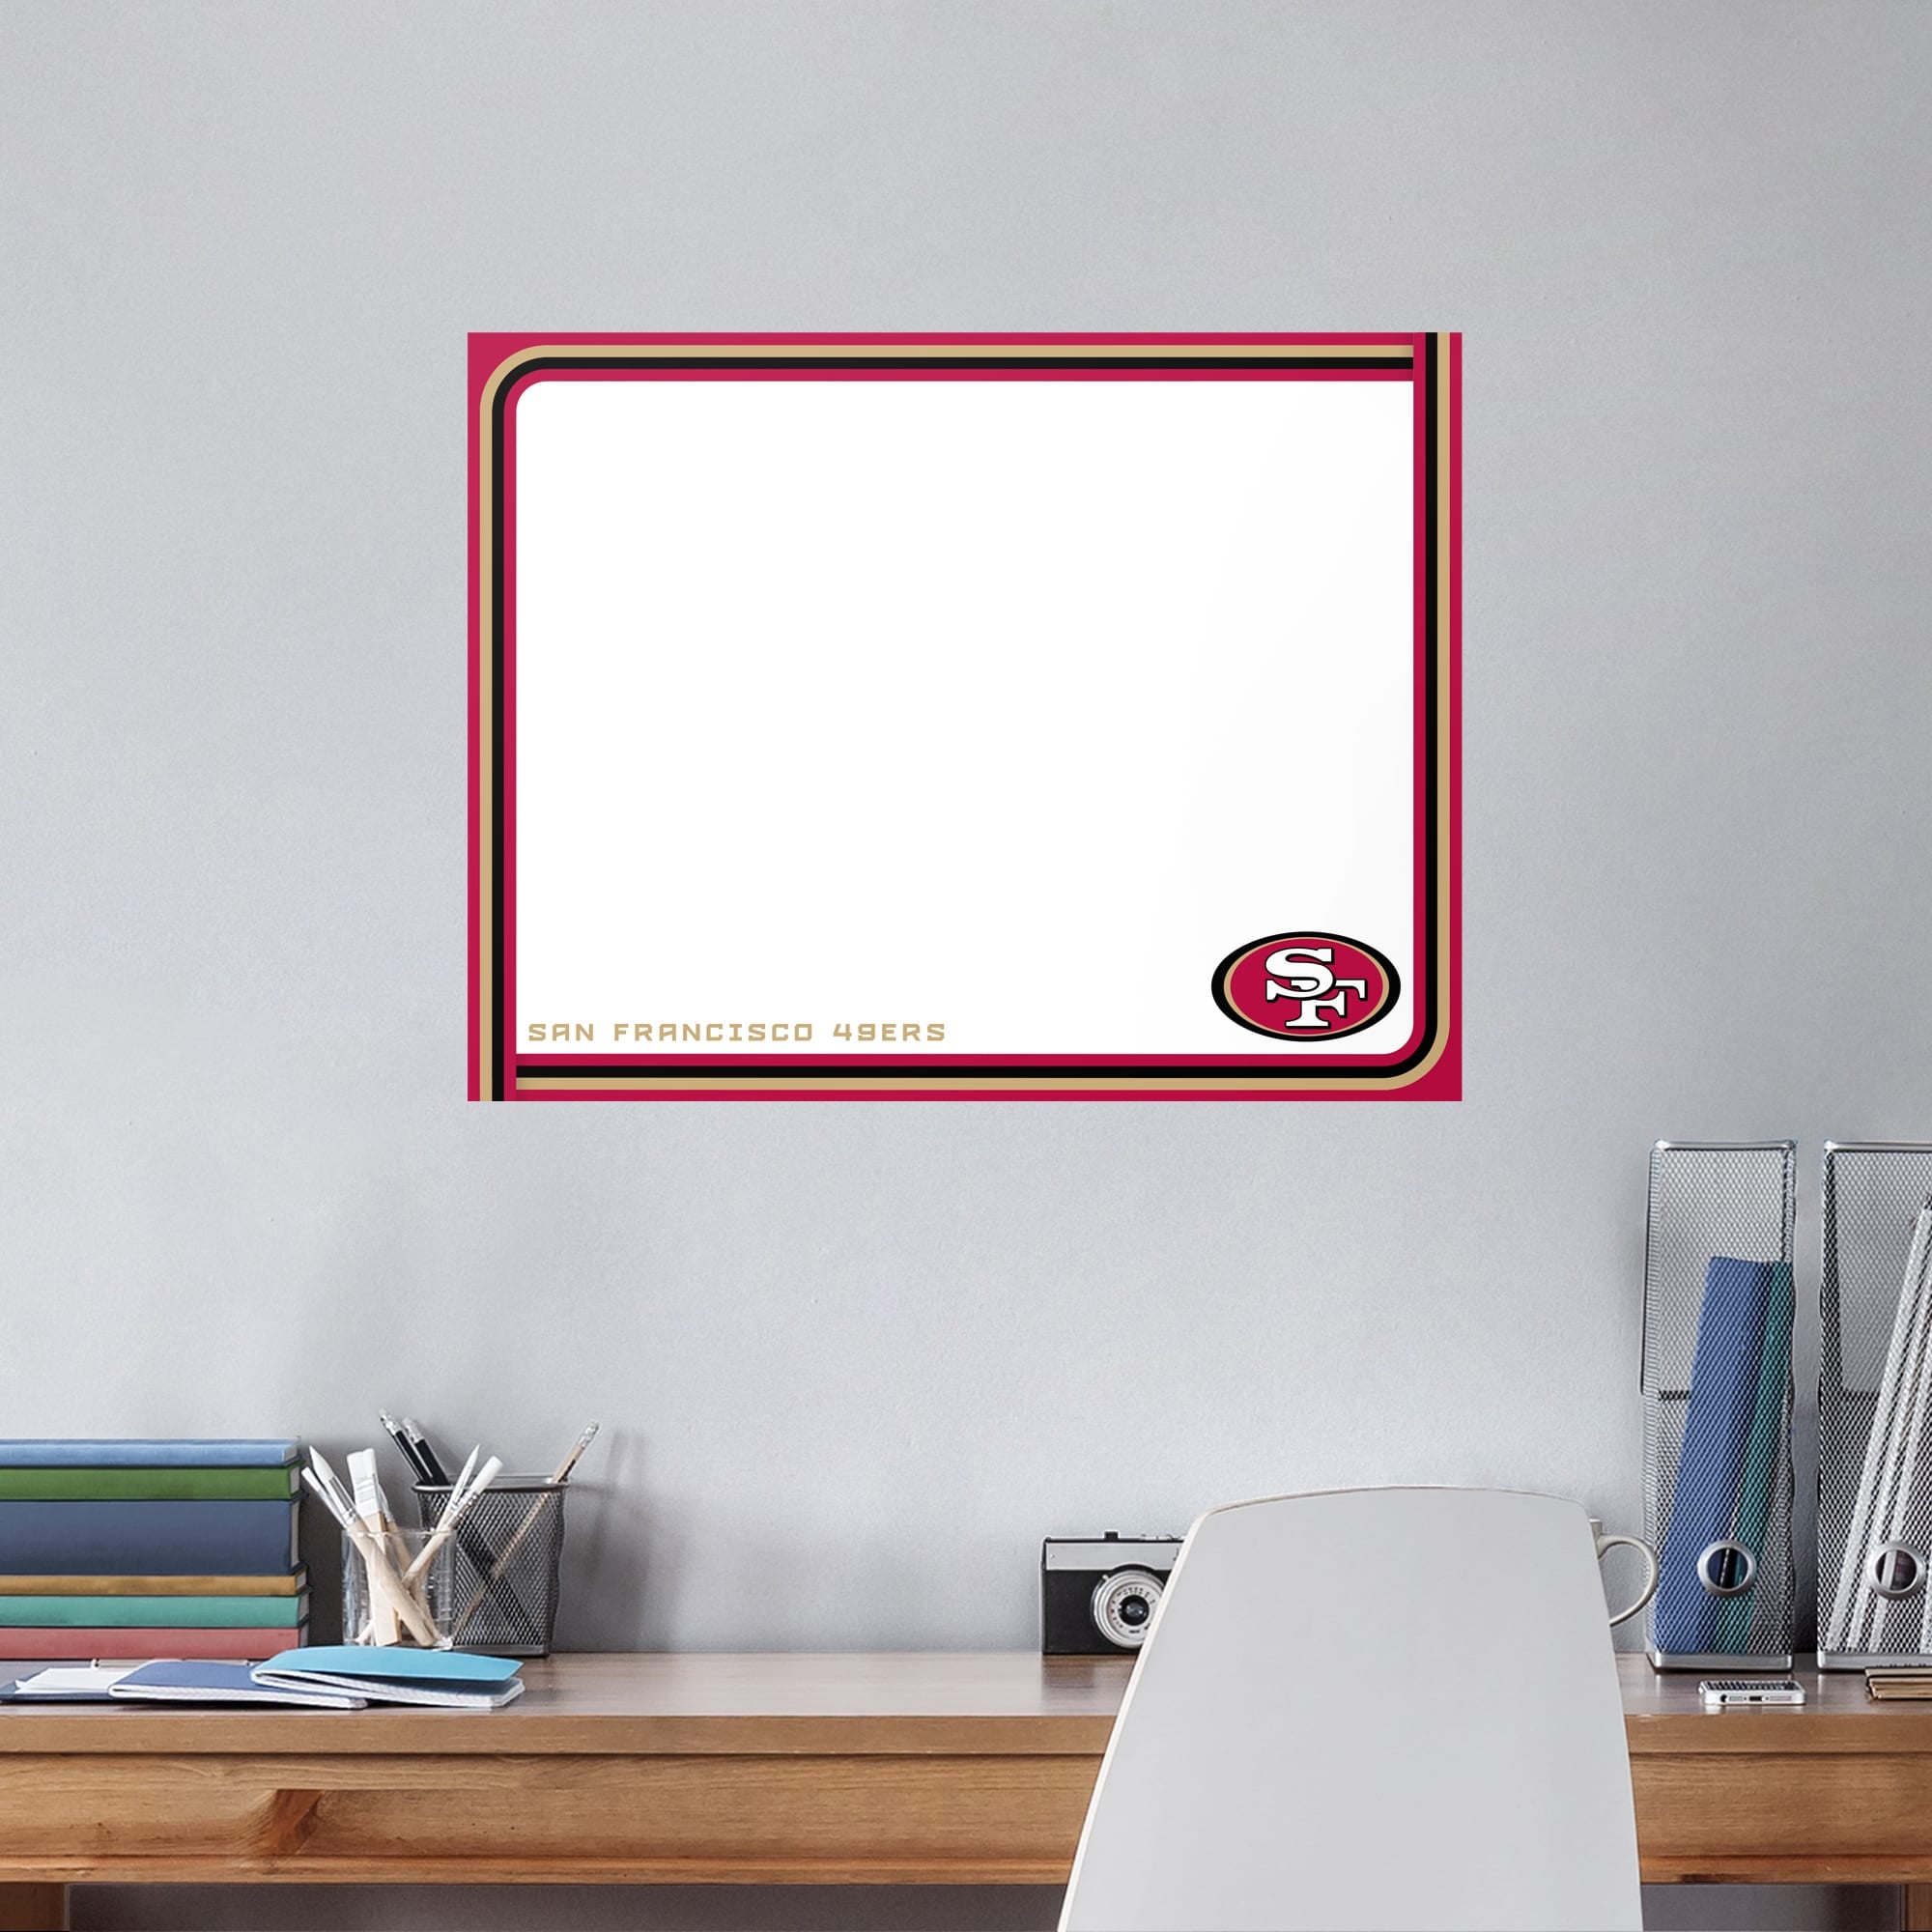 San Francisco 49ers: Dry Erase Whiteboard - Officially Licensed NFL Removable Wall Decal XL by Fathead | Vinyl